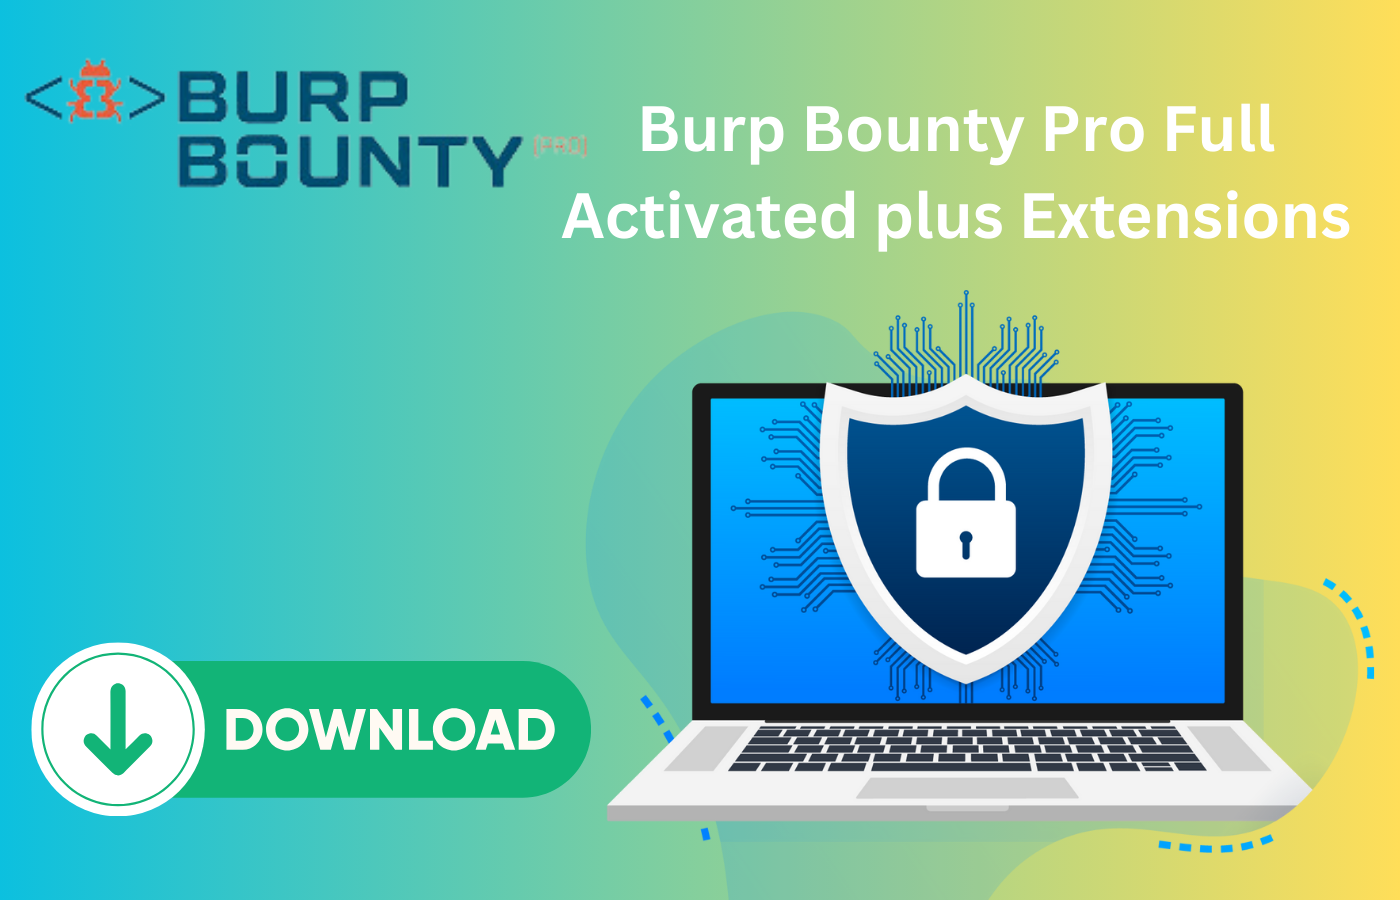 Burp Bounty Pro Full Activated plus Extensions